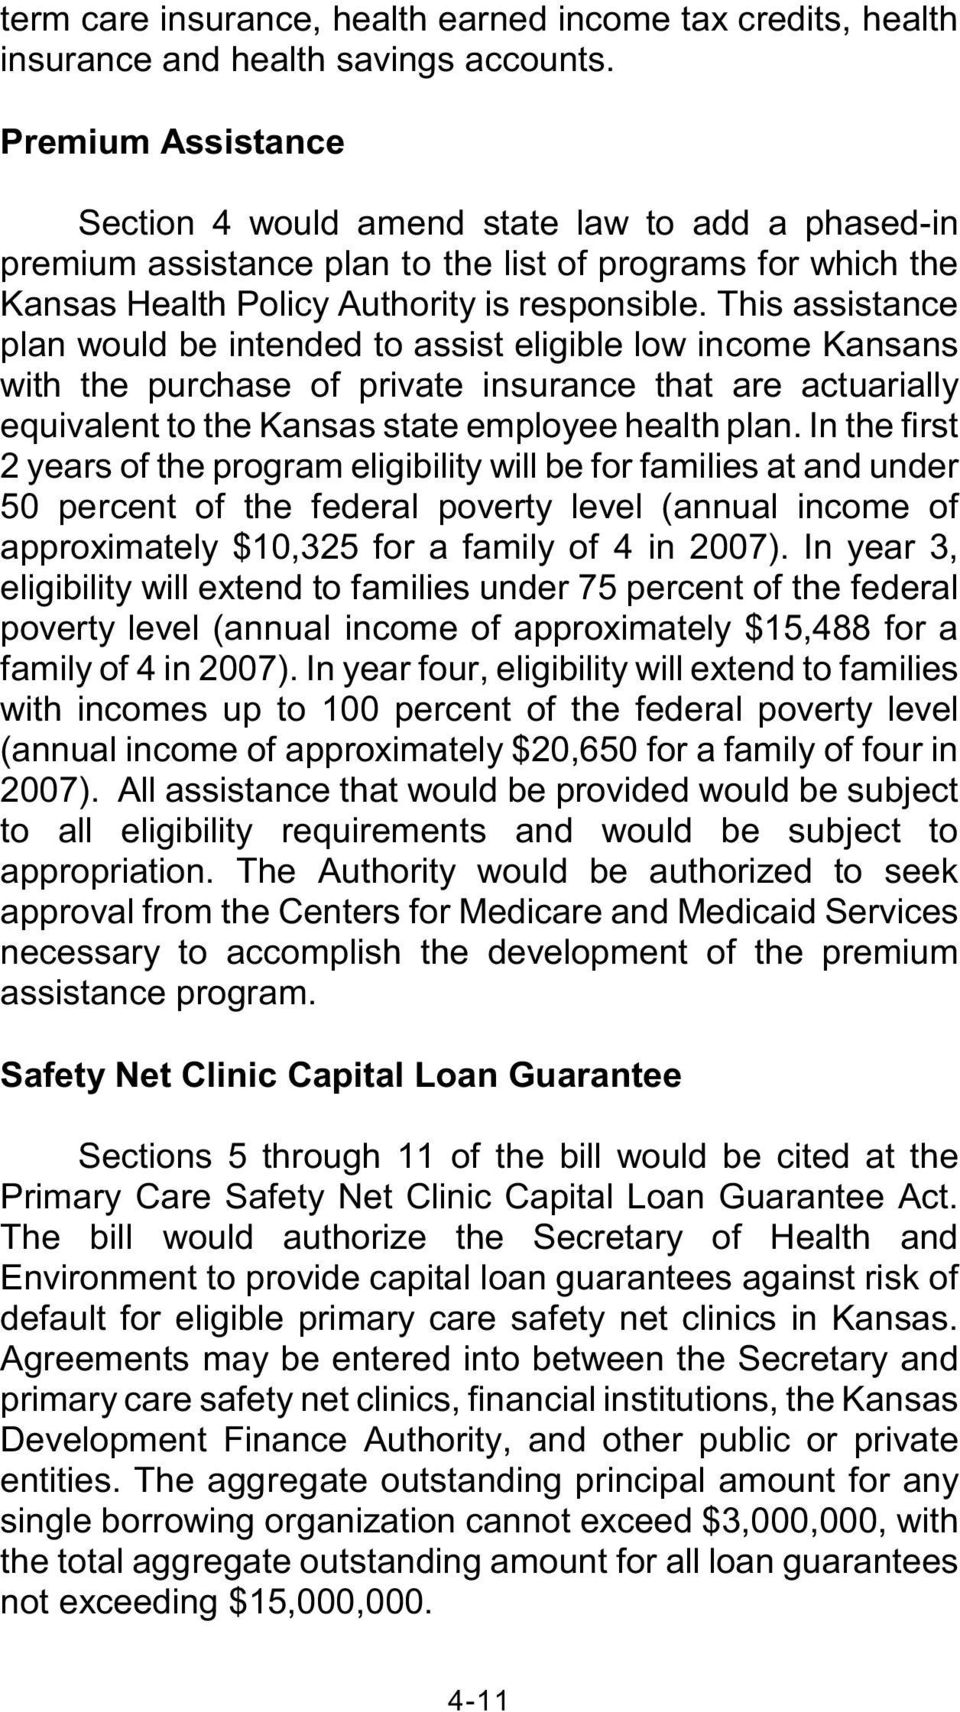 This assistance plan would be intended to assist eligible low income Kansans with the purchase of private insurance that are actuarially equivalent to the Kansas state employee health plan.